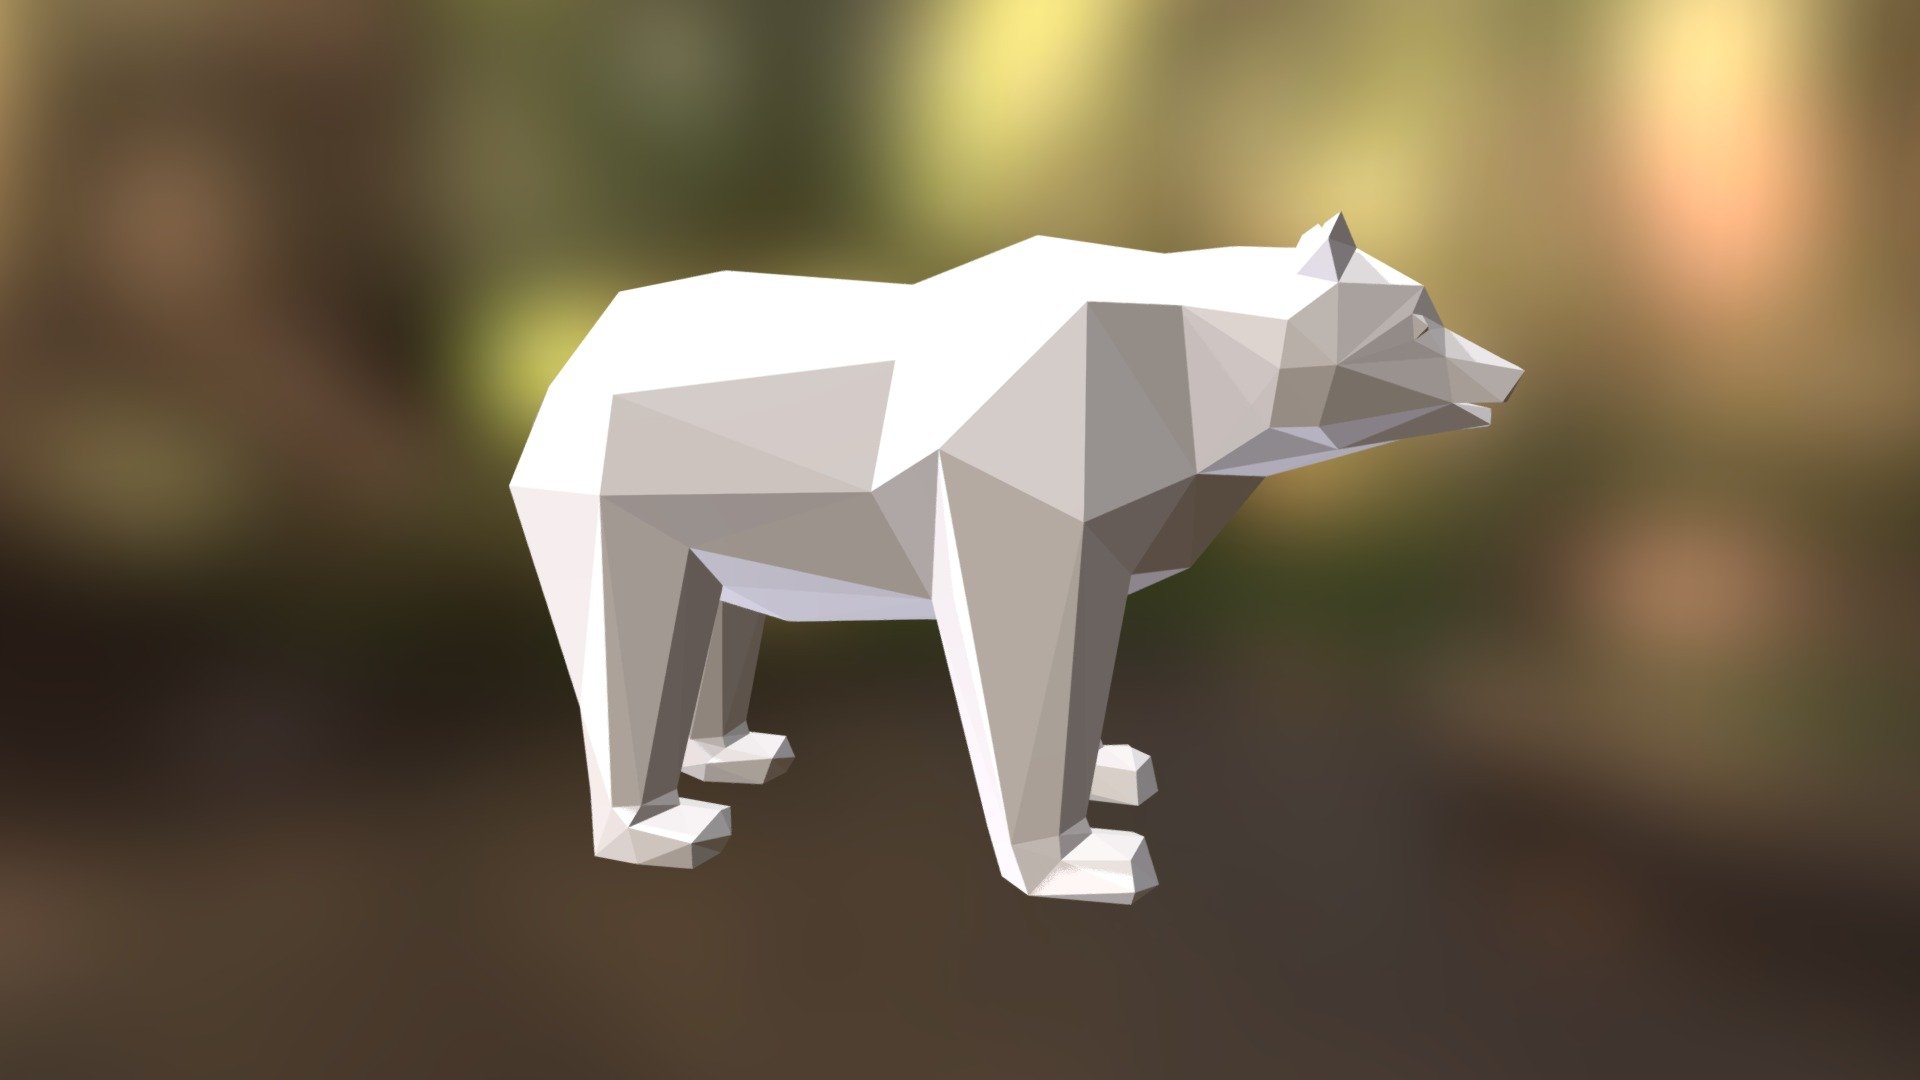 Low Poly 3D model for 3D printing. Bear Low Poly sculpture.  You can find this model for 3D printing in my shop:  -link removed-  Reference model: http://www.cadnav.com - Bear Low Poly - 3D model by Peolla3D 3d model